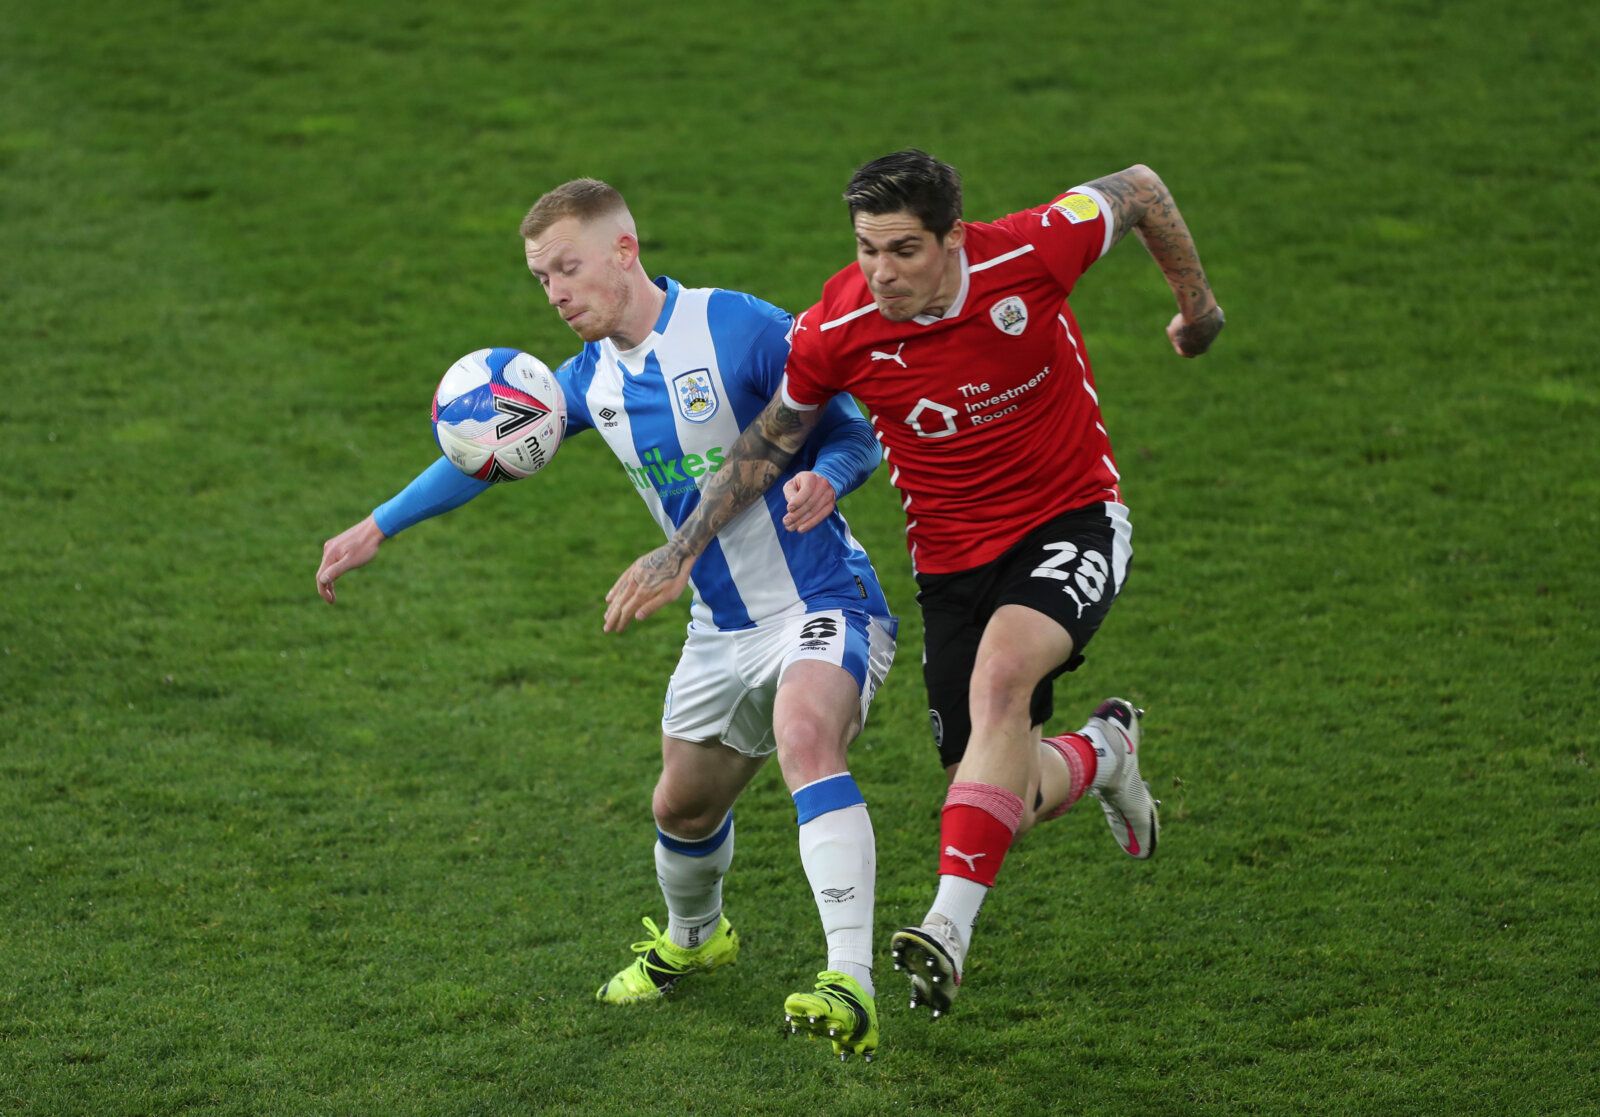 Soccer Football - Championship - Huddersfield Town v Barnsley - John Smith's Stadium, Huddersfield, Britain - April 21, 2021 Huddersfield Town's Lewis O'Brien in action with Barnsley's Dominik Frieser Action Images/Lee Smith EDITORIAL USE ONLY. No use with unauthorized audio, video, data, fixture lists, club/league logos or 'live' services. Online in-match use limited to 75 images, no video emulation. No use in betting, games or single club /league/player publications.  Please contact your accou